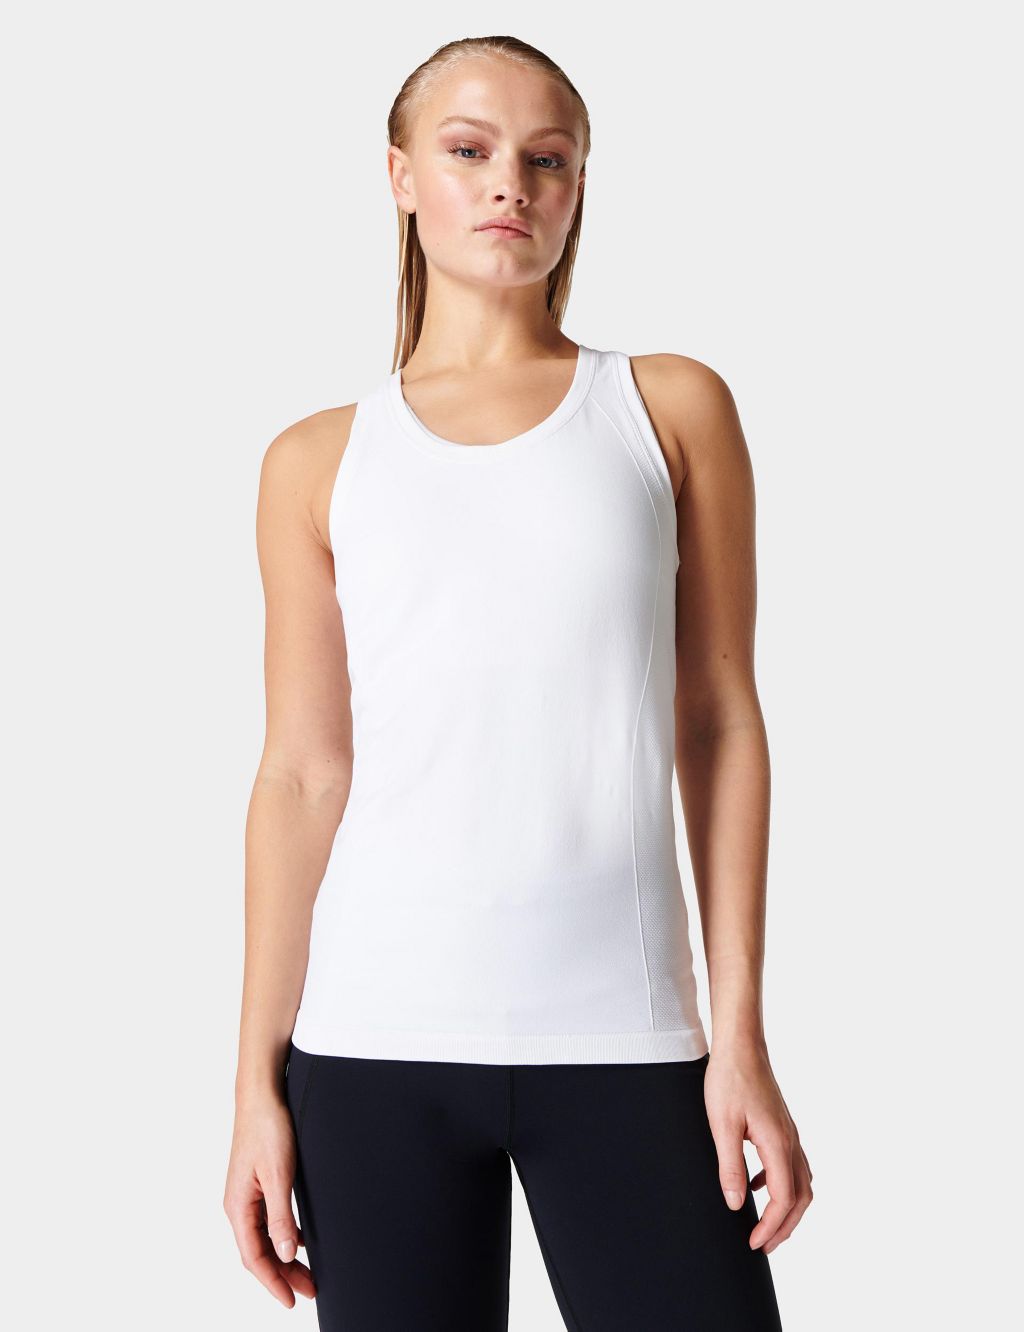 Athlete Seamless Fitted Vest Top image 1